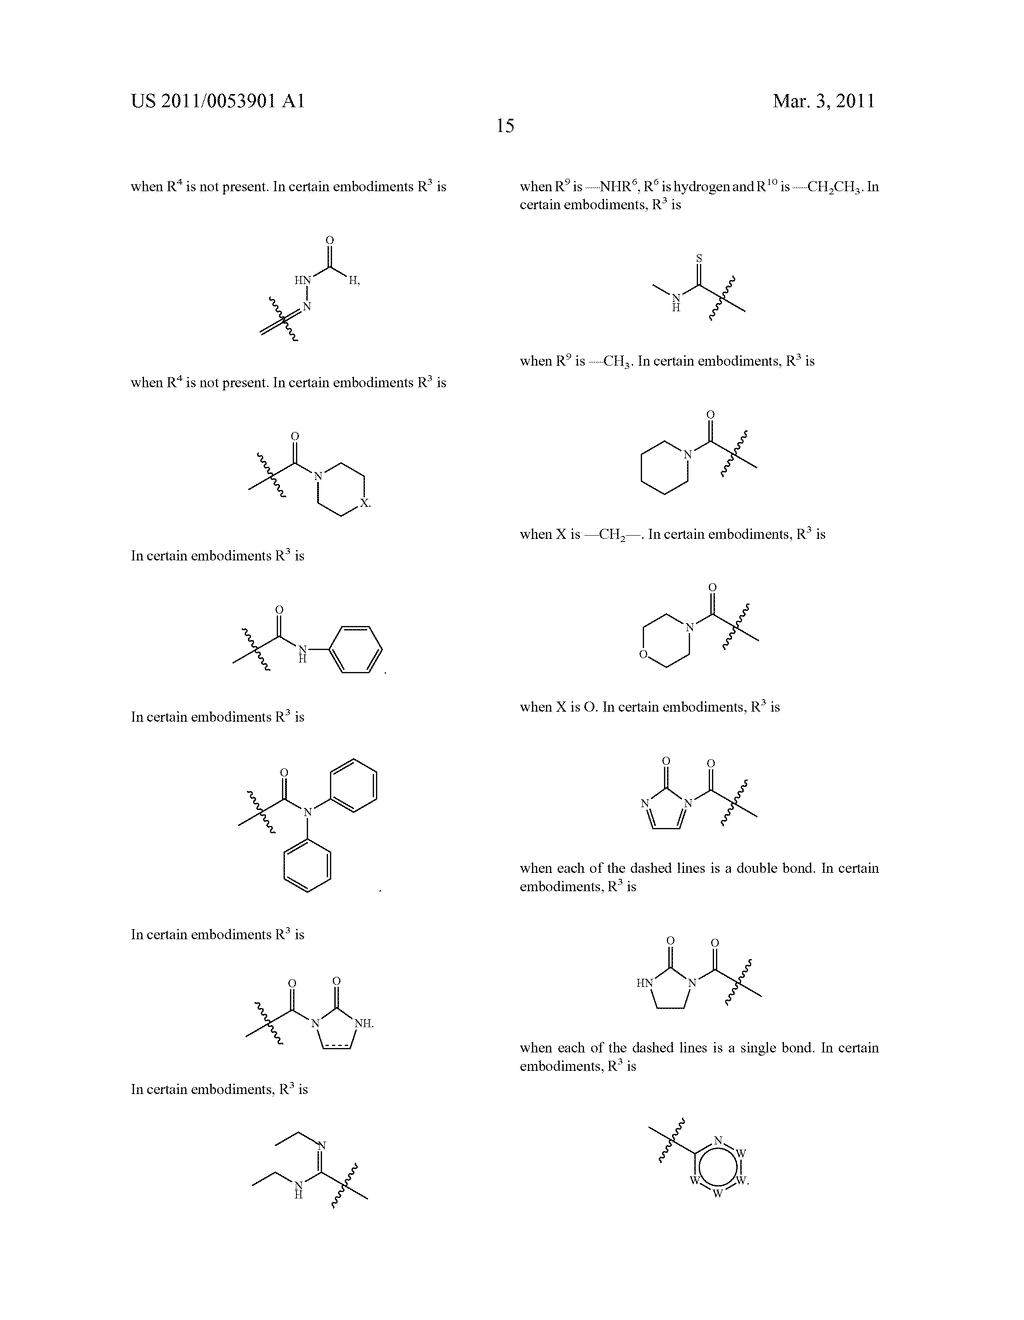 ACETYL MIMIC COMPOUNDS FOR THE INHIBITION OF ISOPRENYL-S-CYSTEINYL METHYLTRANSFERASE - diagram, schematic, and image 16